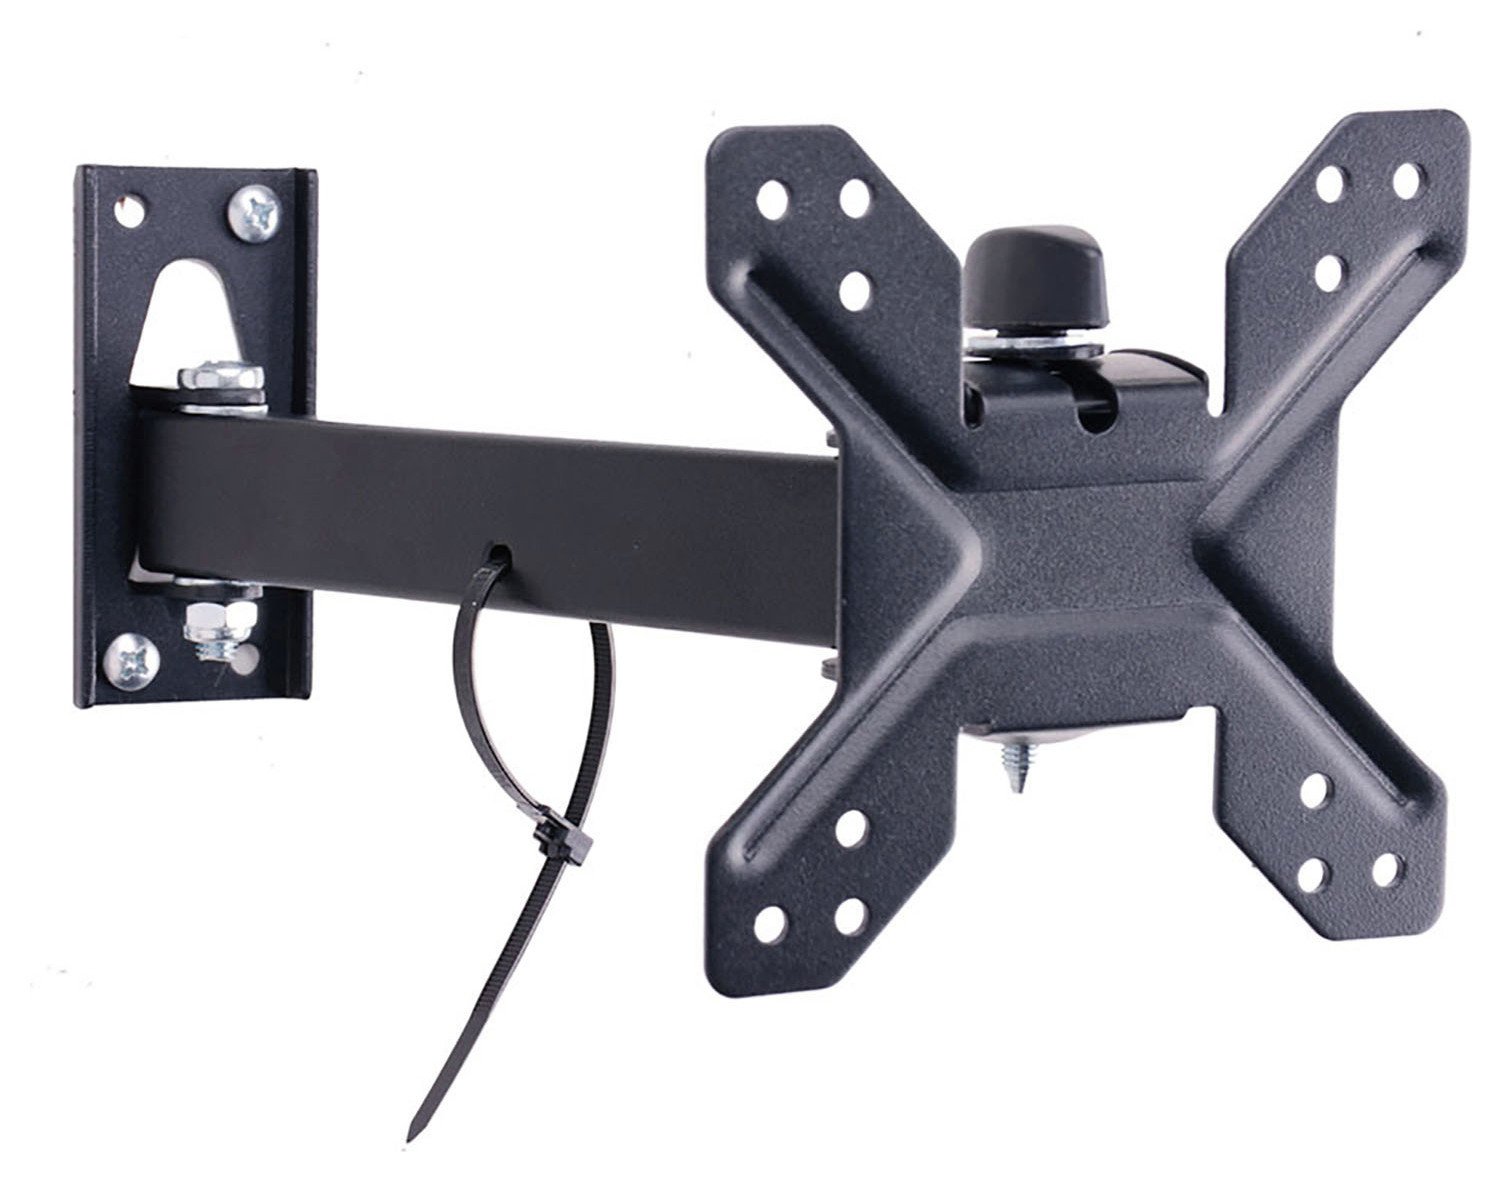 Standard Multi Position Up to 23 Inch TV Wall Bracket